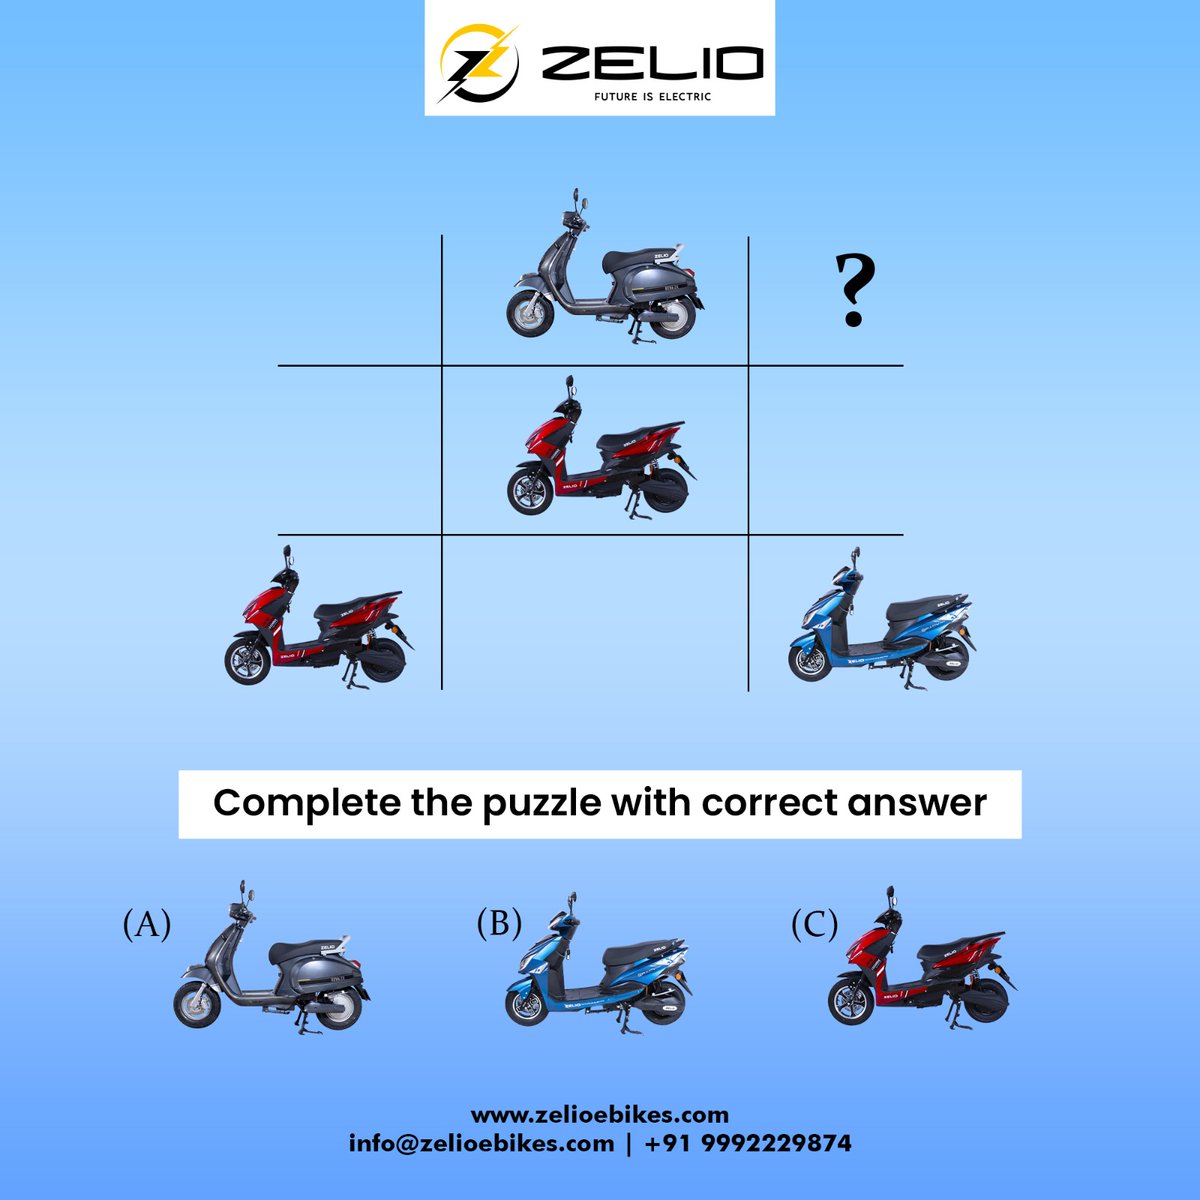 Comment the right answer below
. 
.
#Zelioebikes #ebike #escooter #EV #electricscooter  #scootyride #braingame #braingames #game2023 #gamepost #GamePost #ev #EVScooter #evscooter #evscootersinindia #evlover #evrider #evride #sundaygame #comfortride